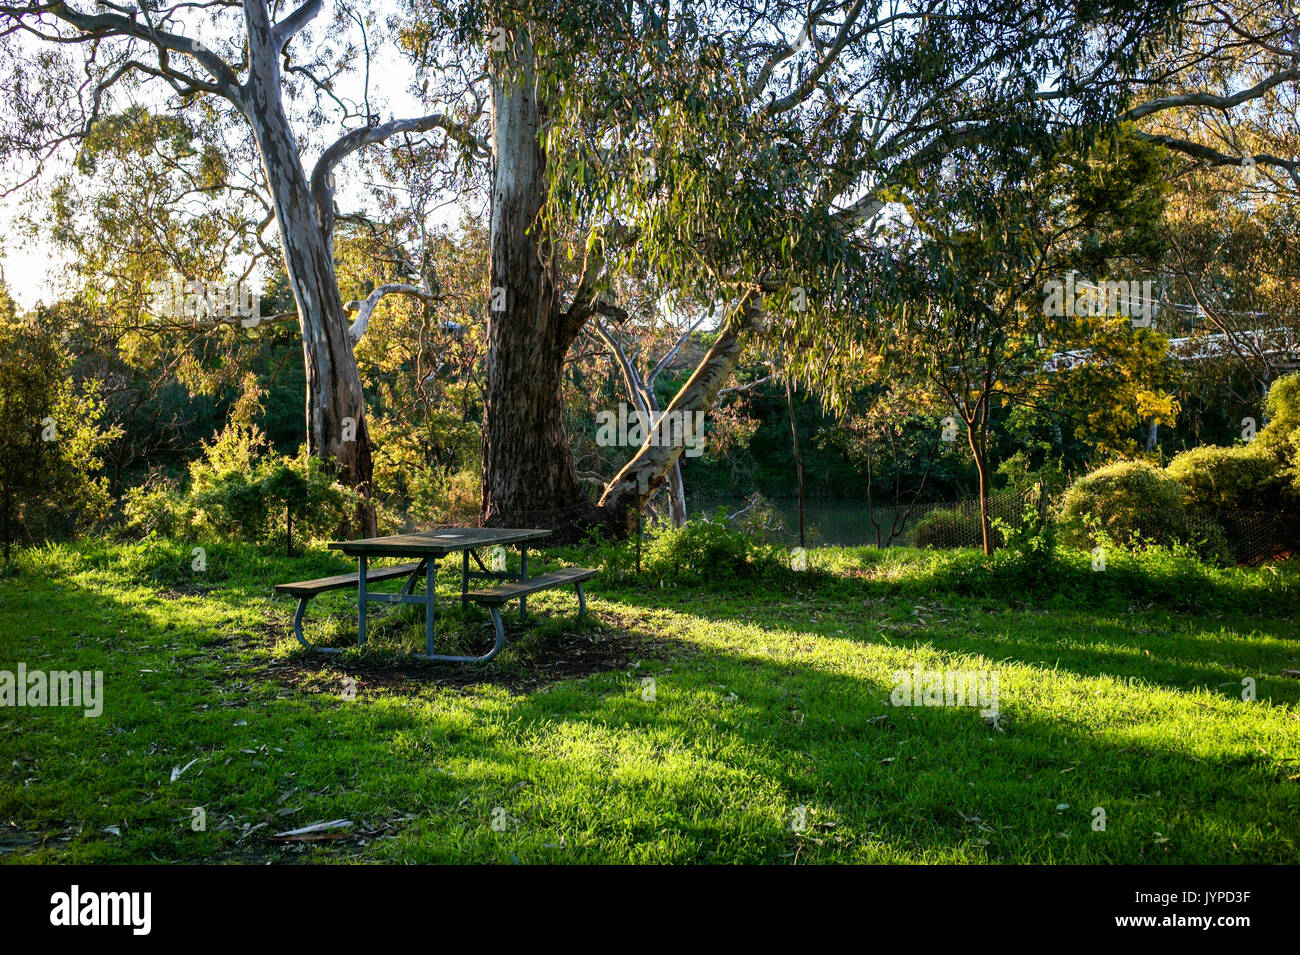 Picnic table in afternoon sunlight at Yarra Bend Park, Melbourne, Australia Stock Photo